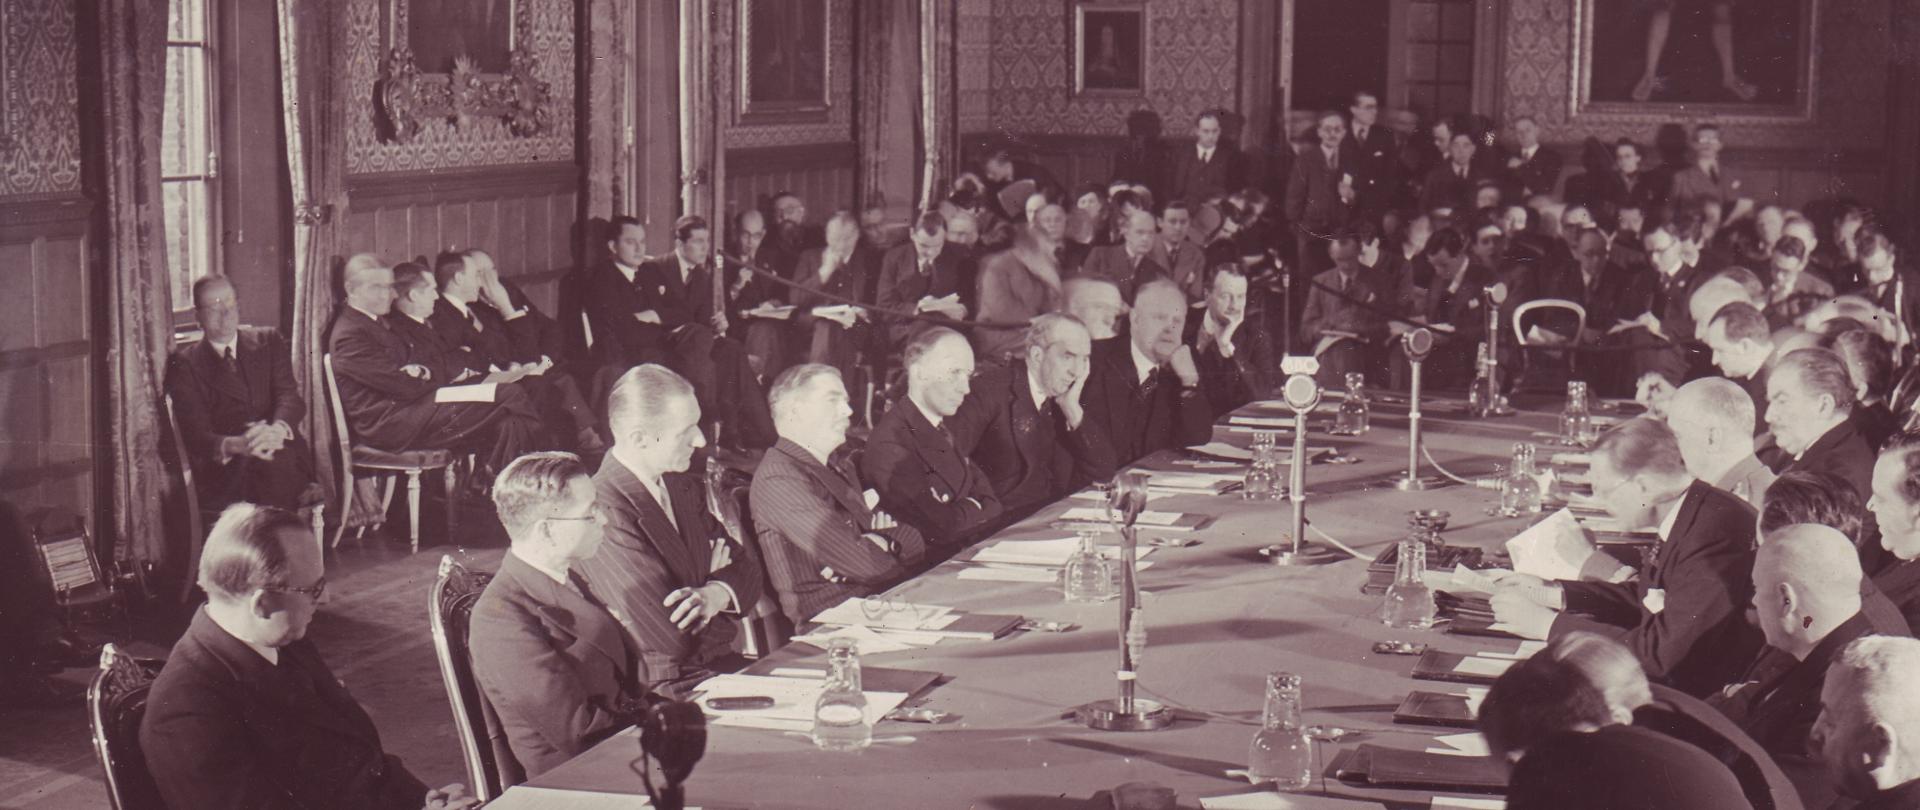 International meeting held at London's St James’s Palace, devoted to the prosecution of German war criminals, 13 January 1942